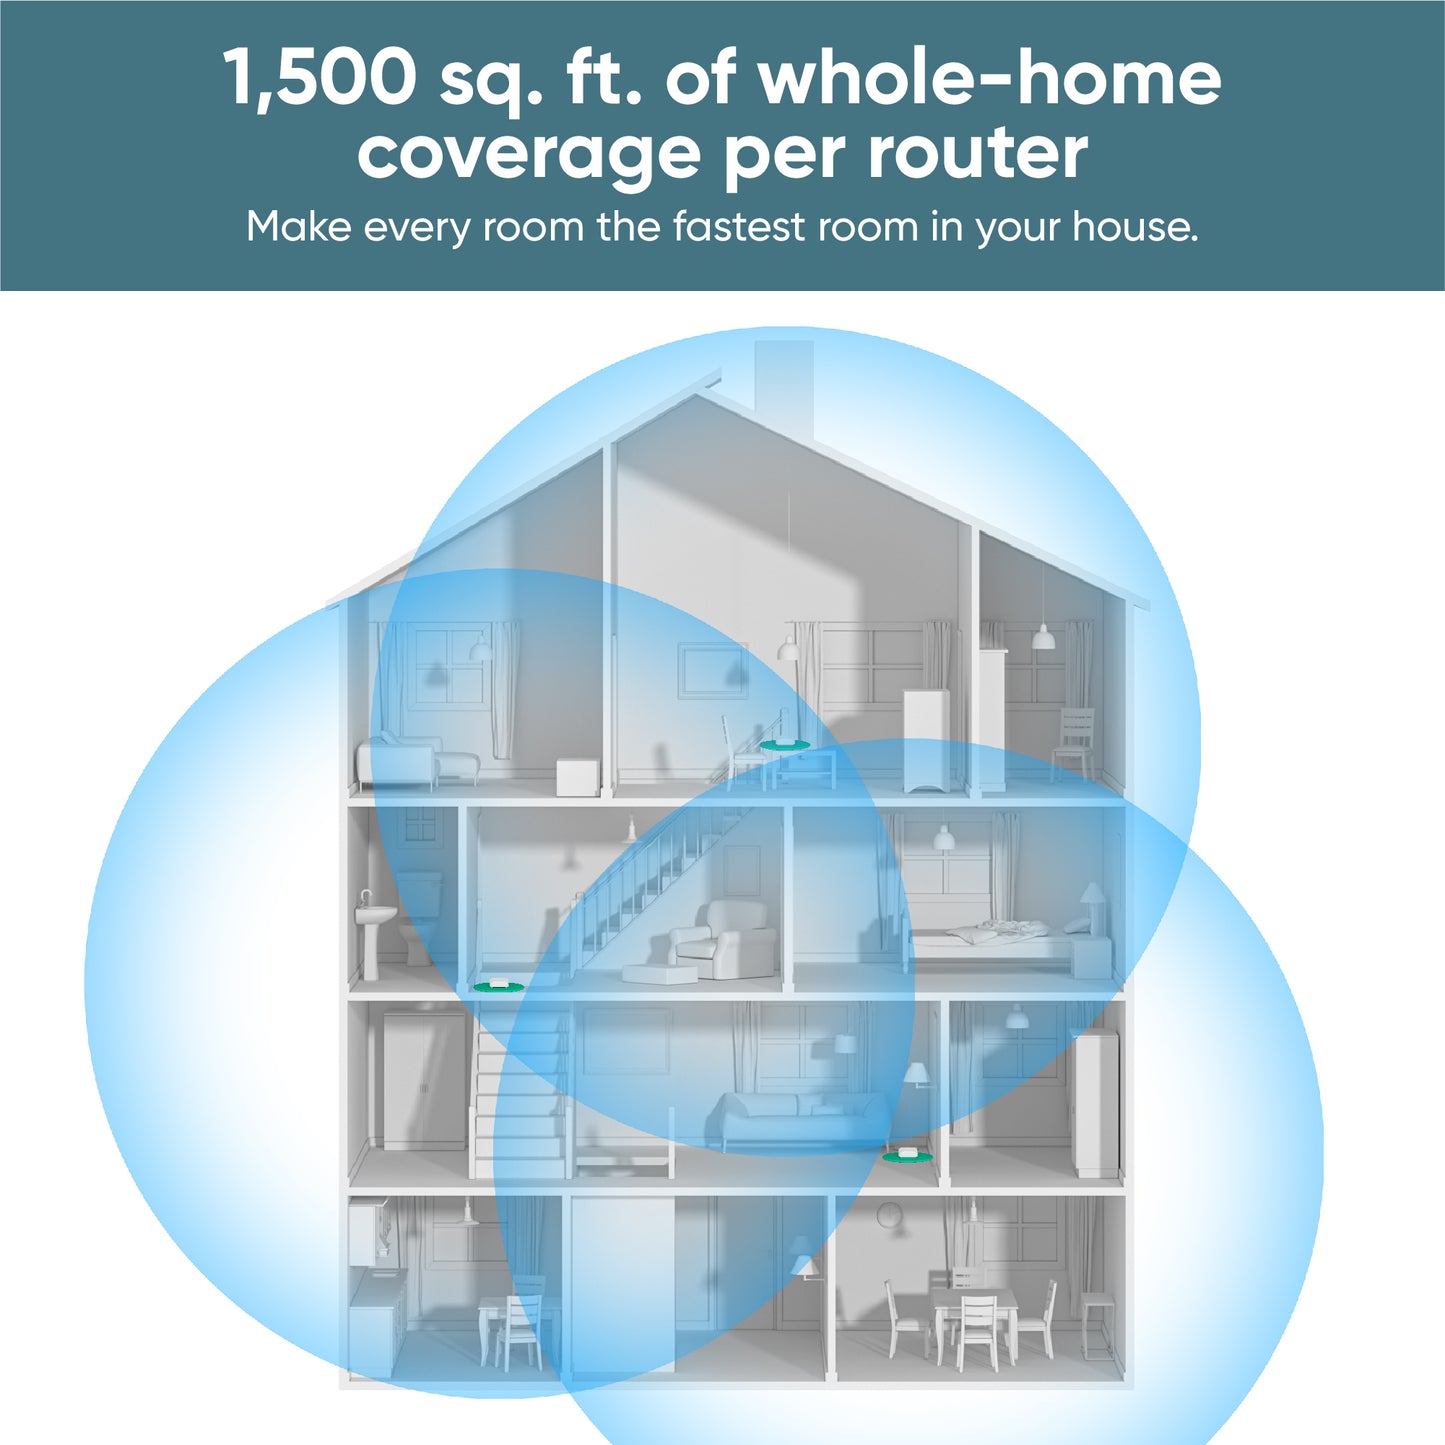 Diagram illustrating how Wyze Mesh Router can cover an entire home in wall-to-wall coverage.